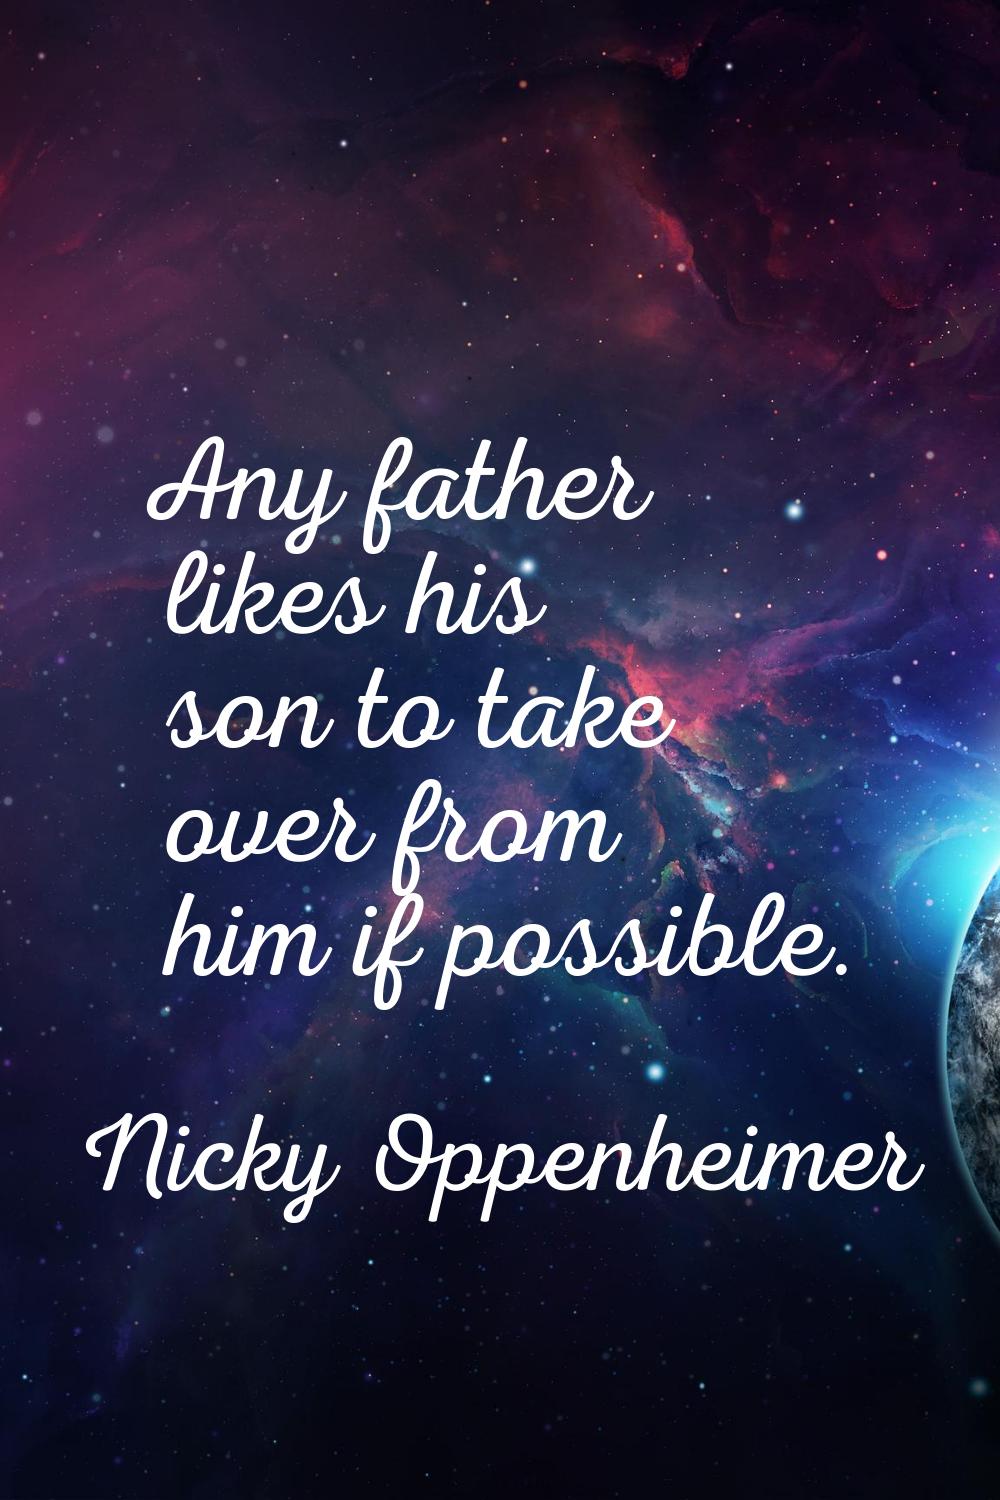 Any father likes his son to take over from him if possible.